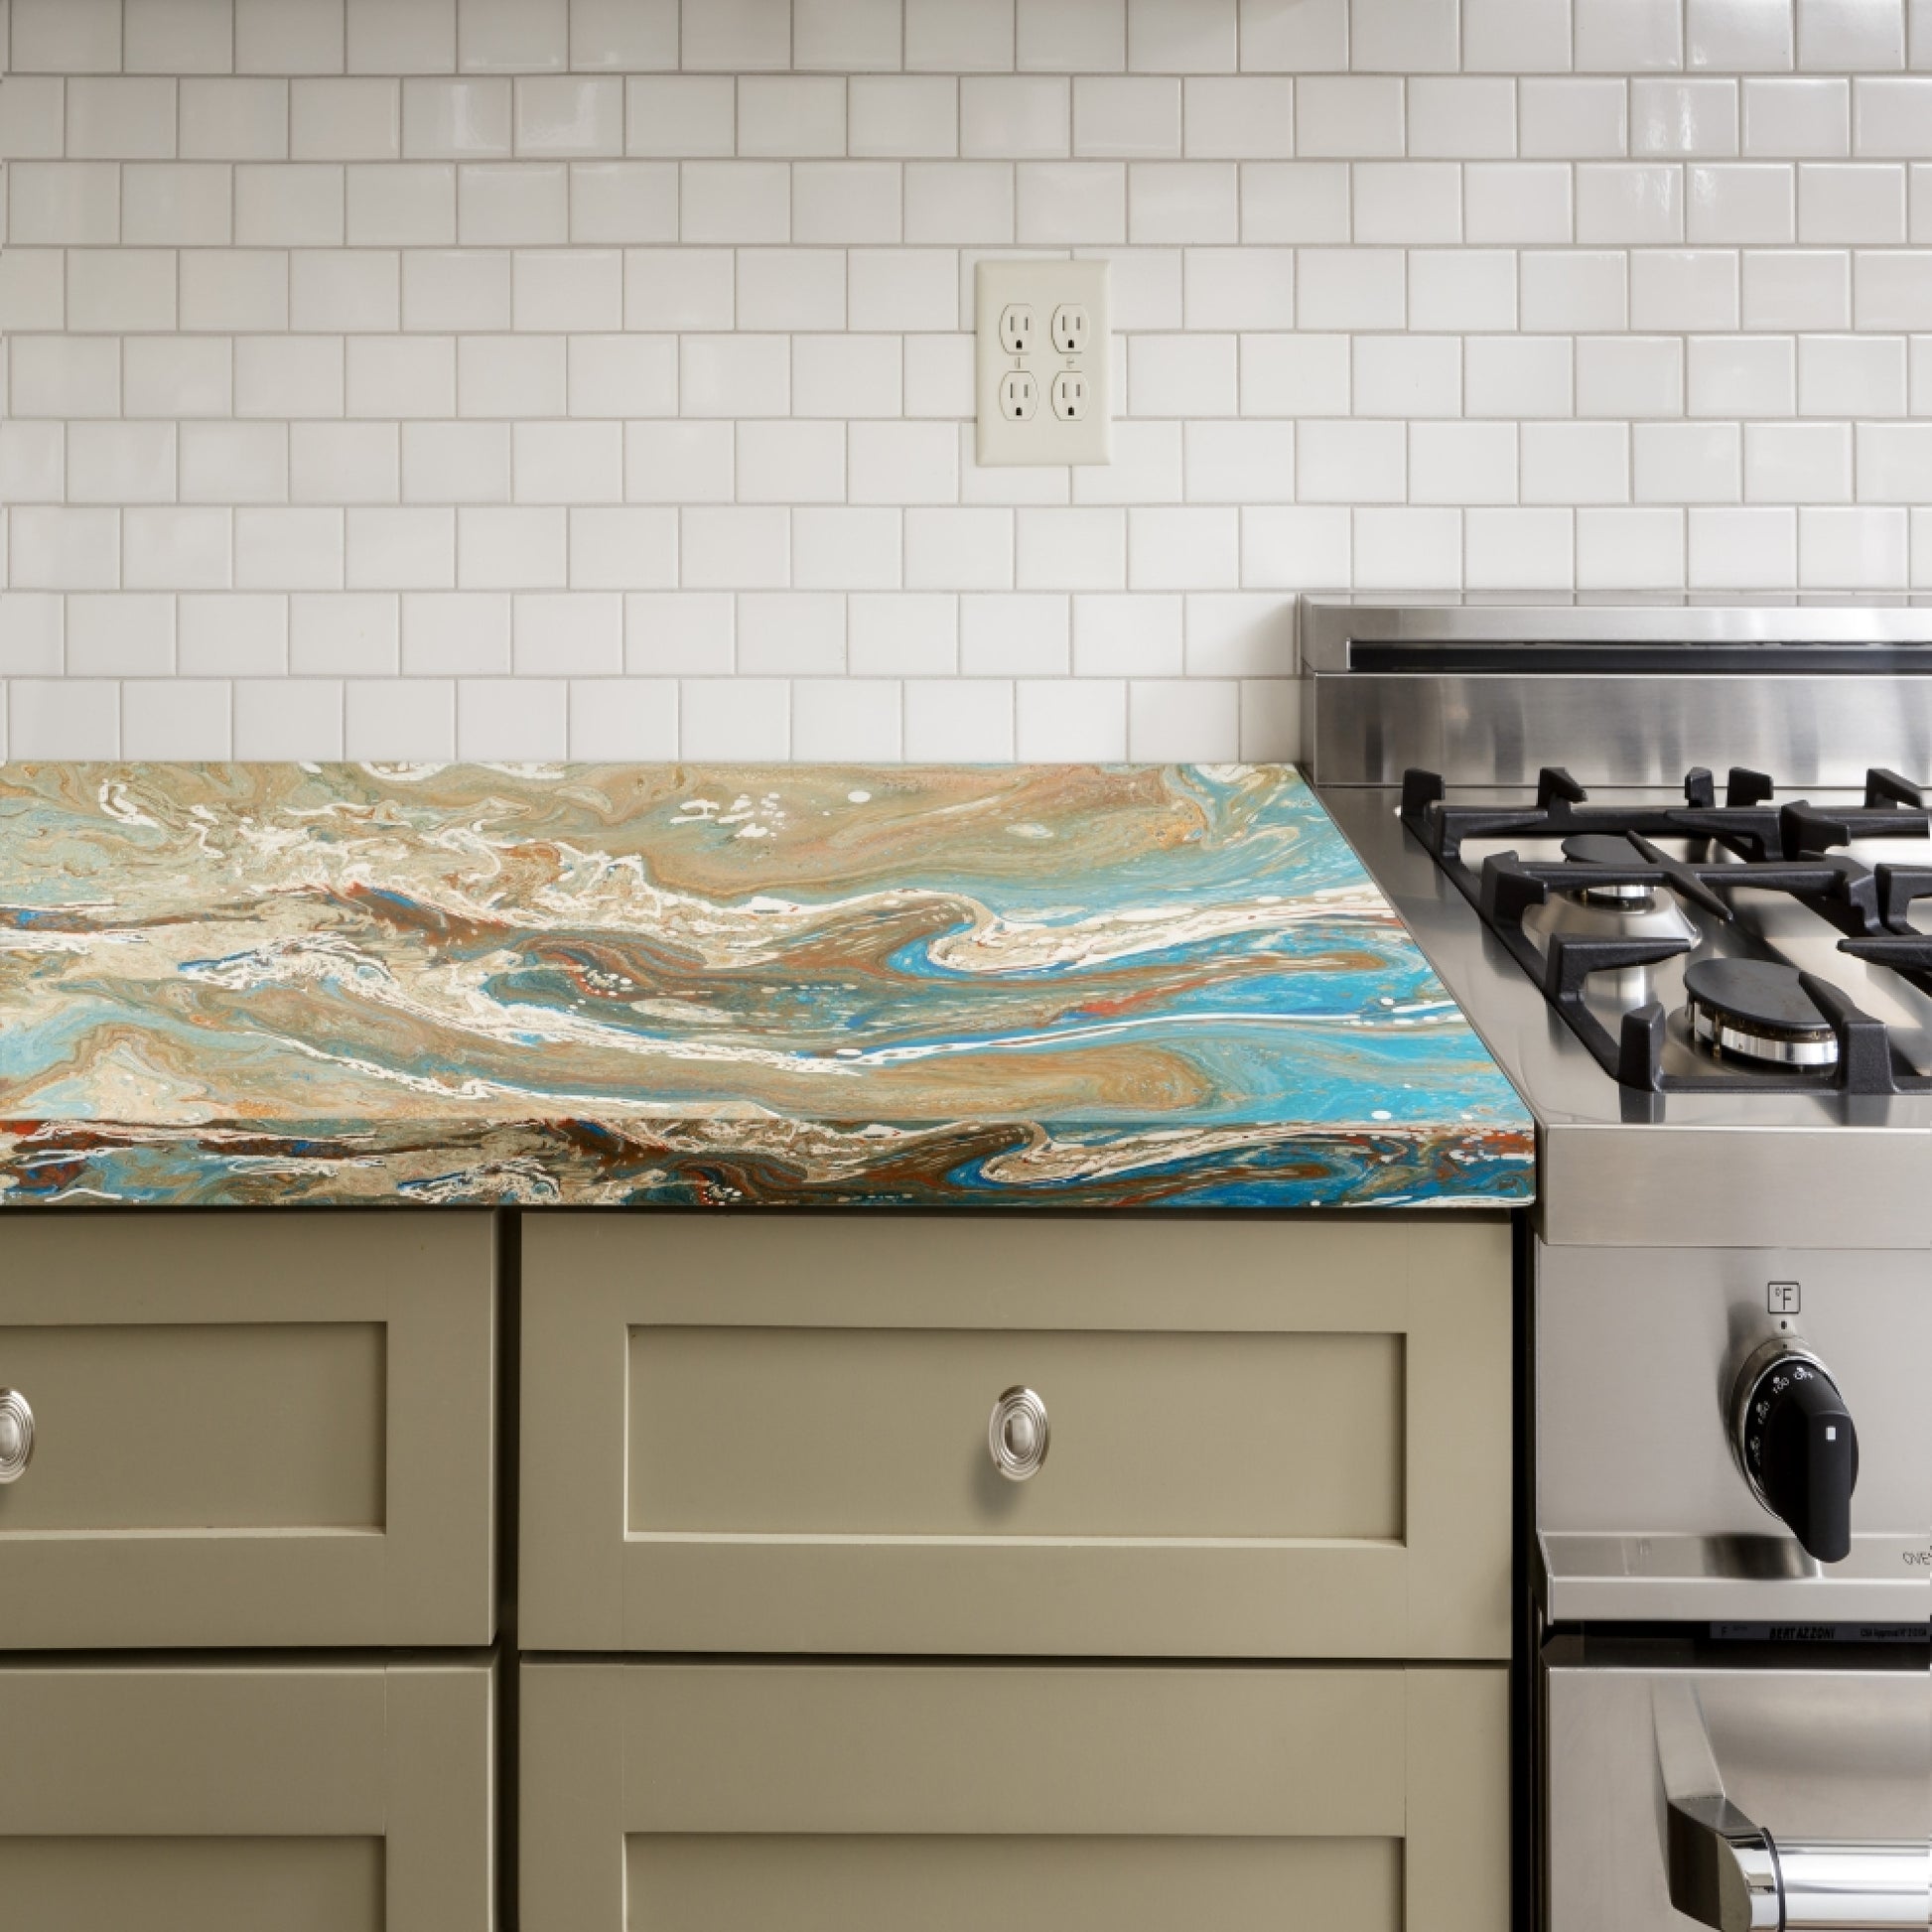 Revamp your kitchen with an epoxy resin countertop that resembles natural stone.